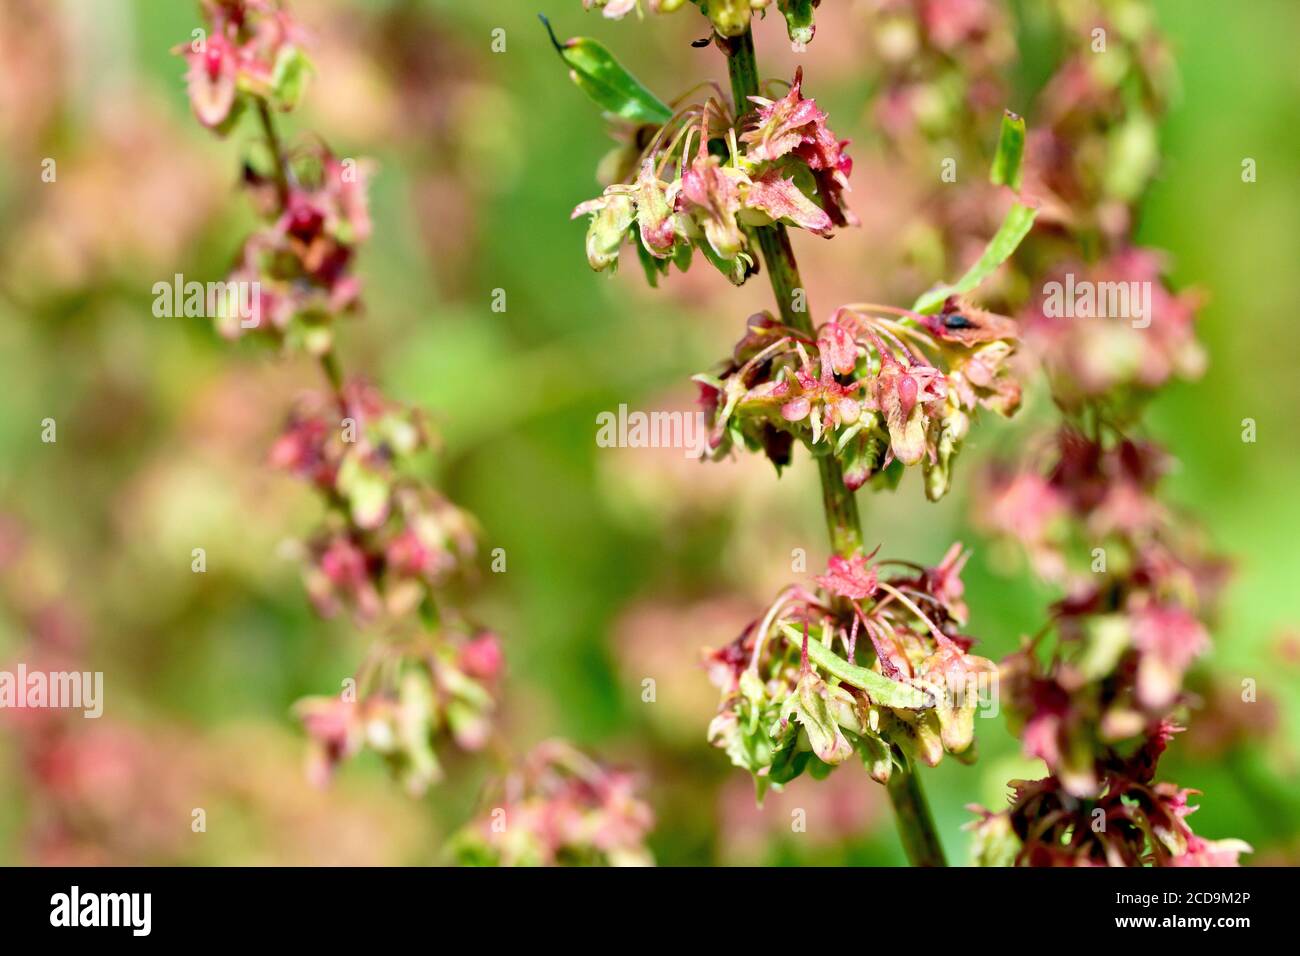 Broad-leaved Dock (rumex obtusifolius), close up showing the fruit or seed pods developing on the plant. Stock Photo